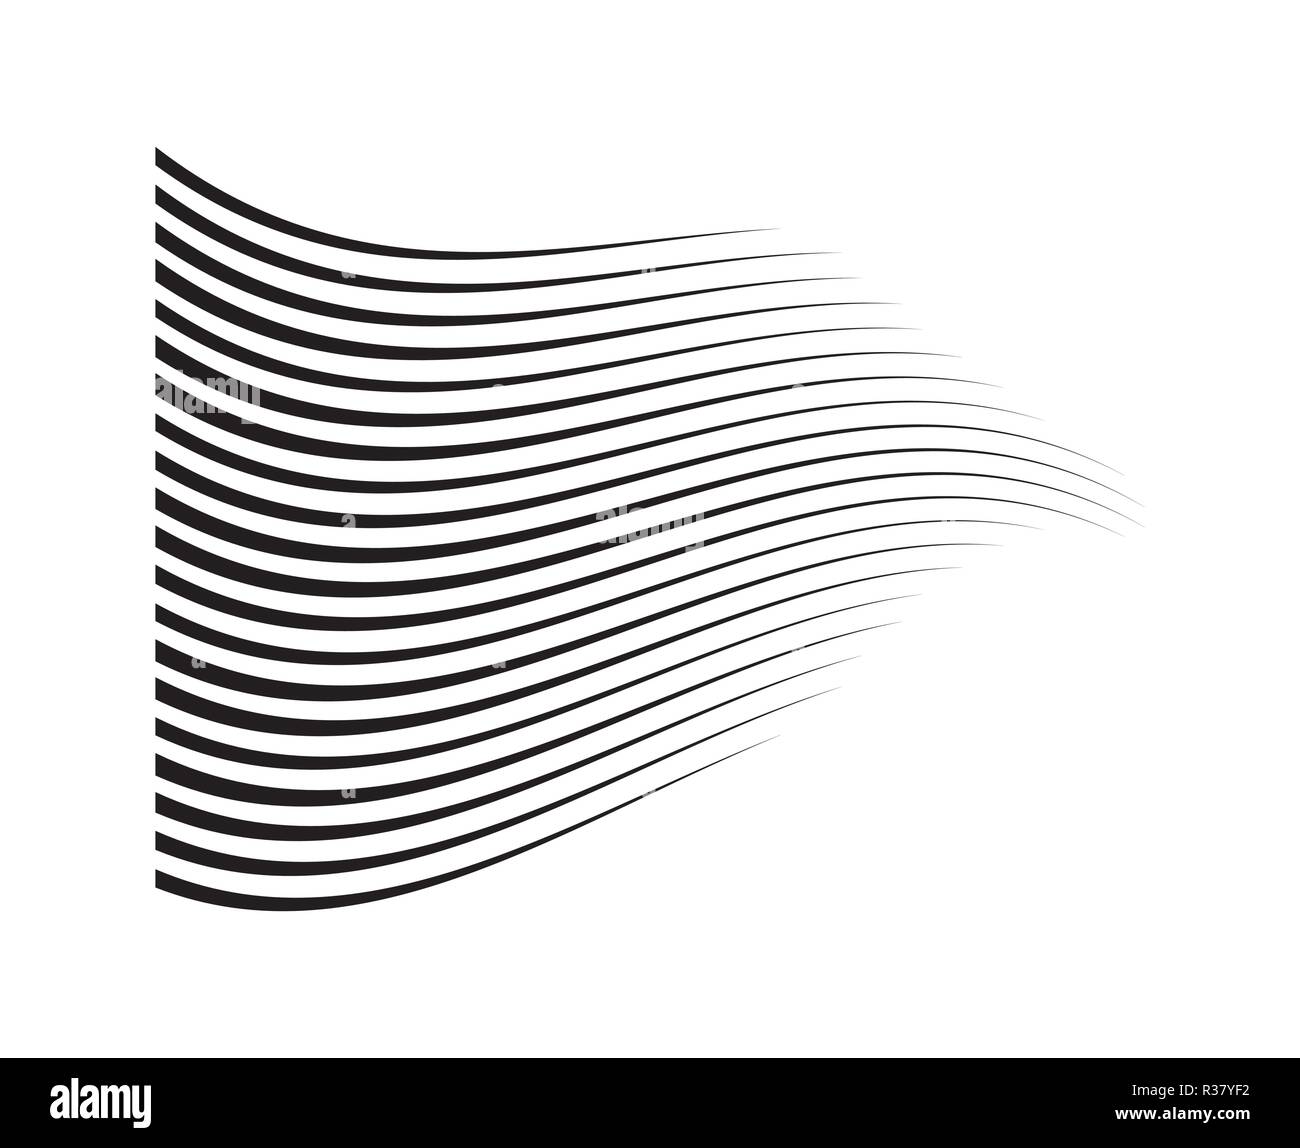 1,689,833 Wavy Lines Images, Stock Photos, 3D objects, & Vectors